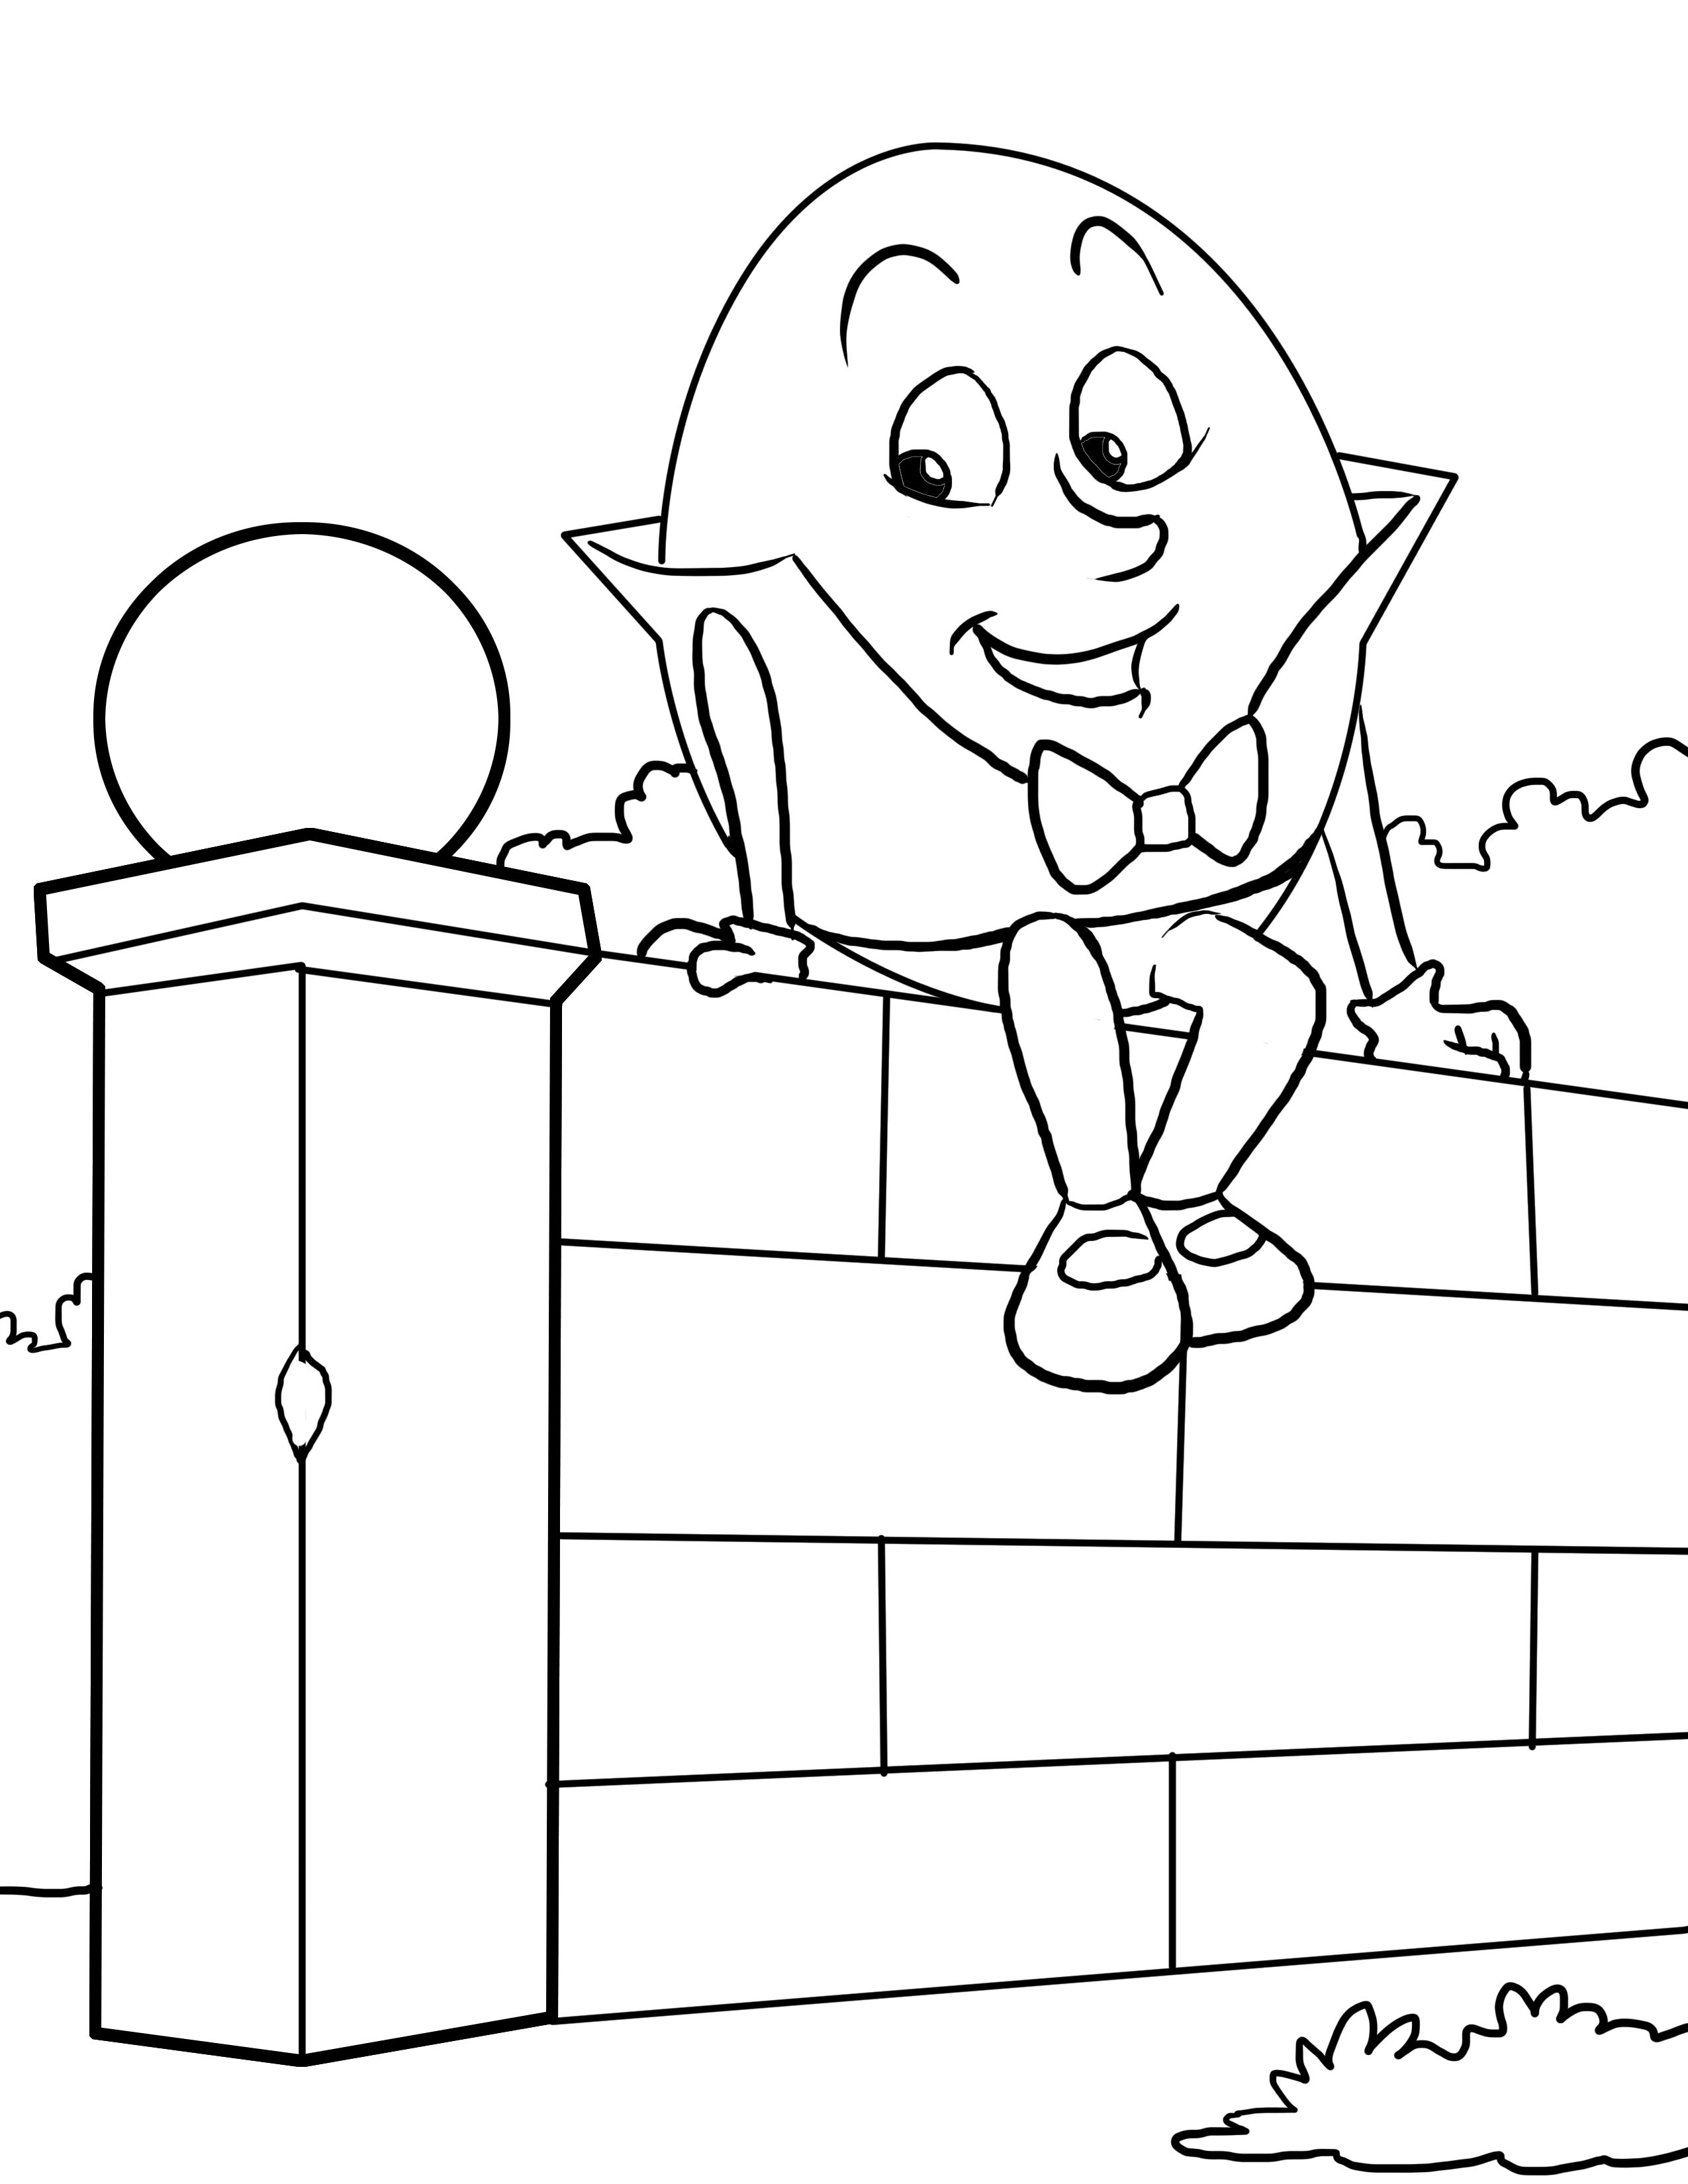 humpty-dumpty-clipart-colouring-page-humpty-dumpty-colouring-page